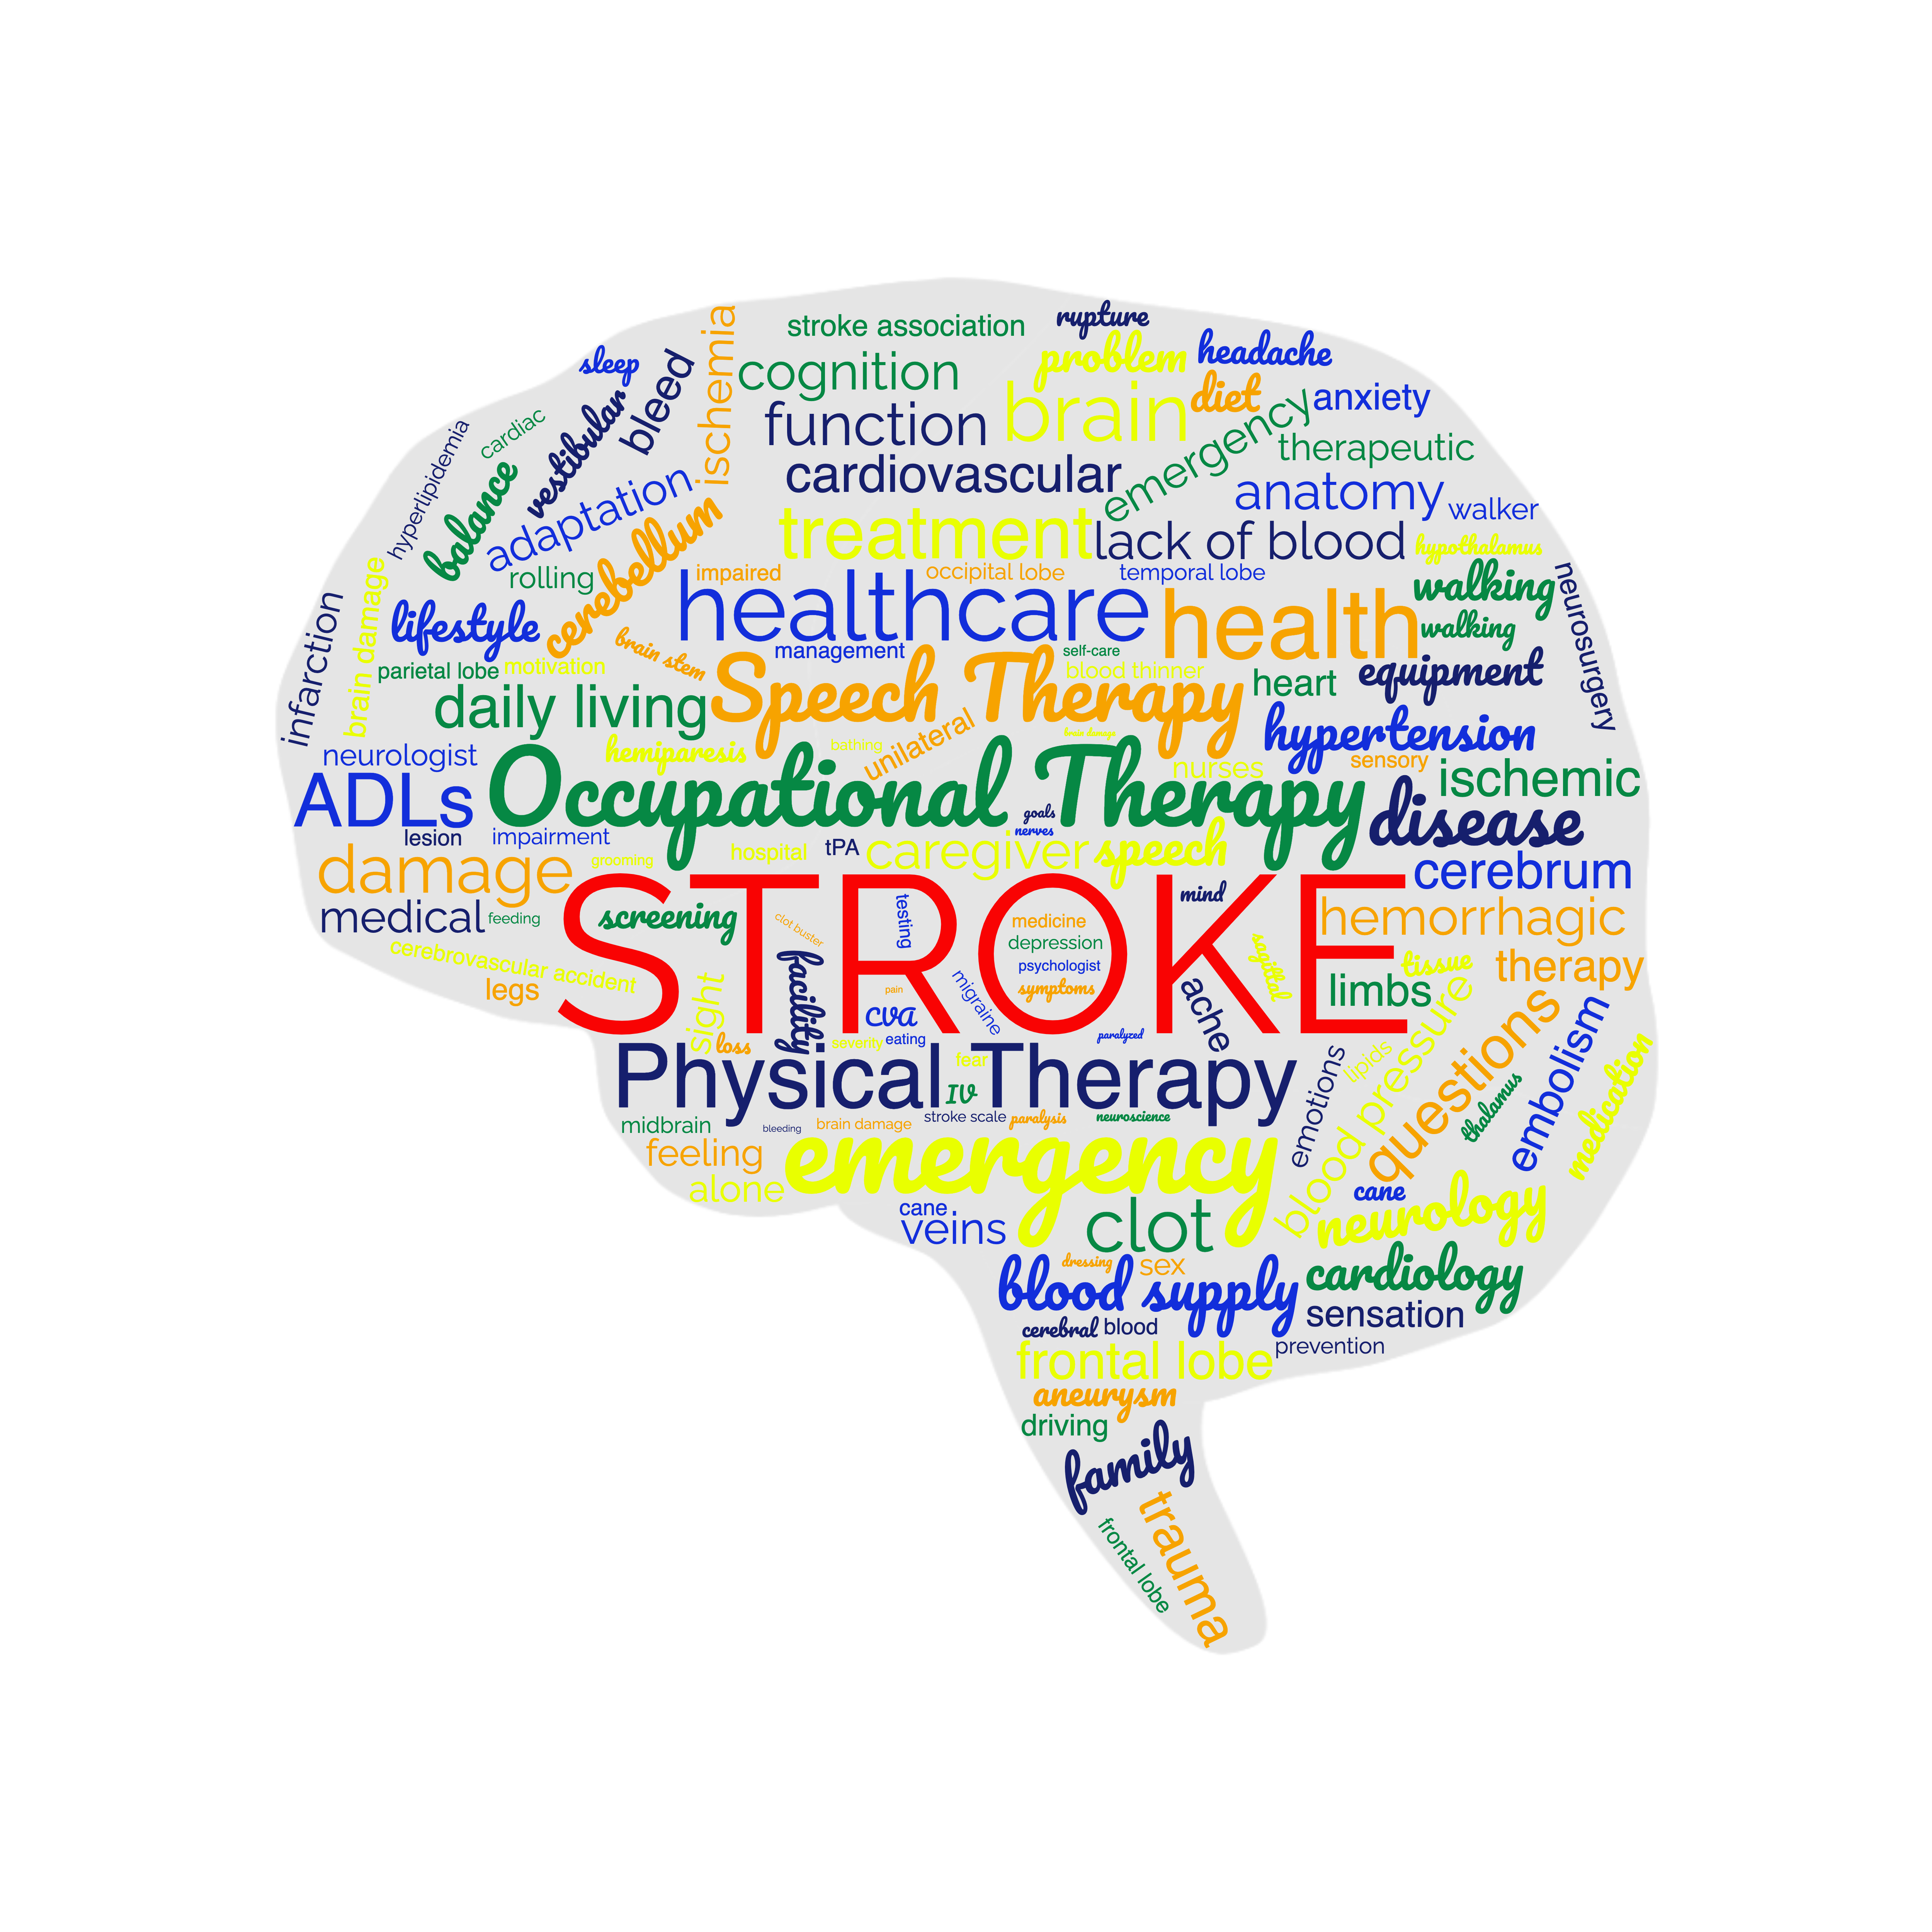 //www.509therapyhub.com/wp-content/uploads/2022/06/Stroke-Word-Cloud.png